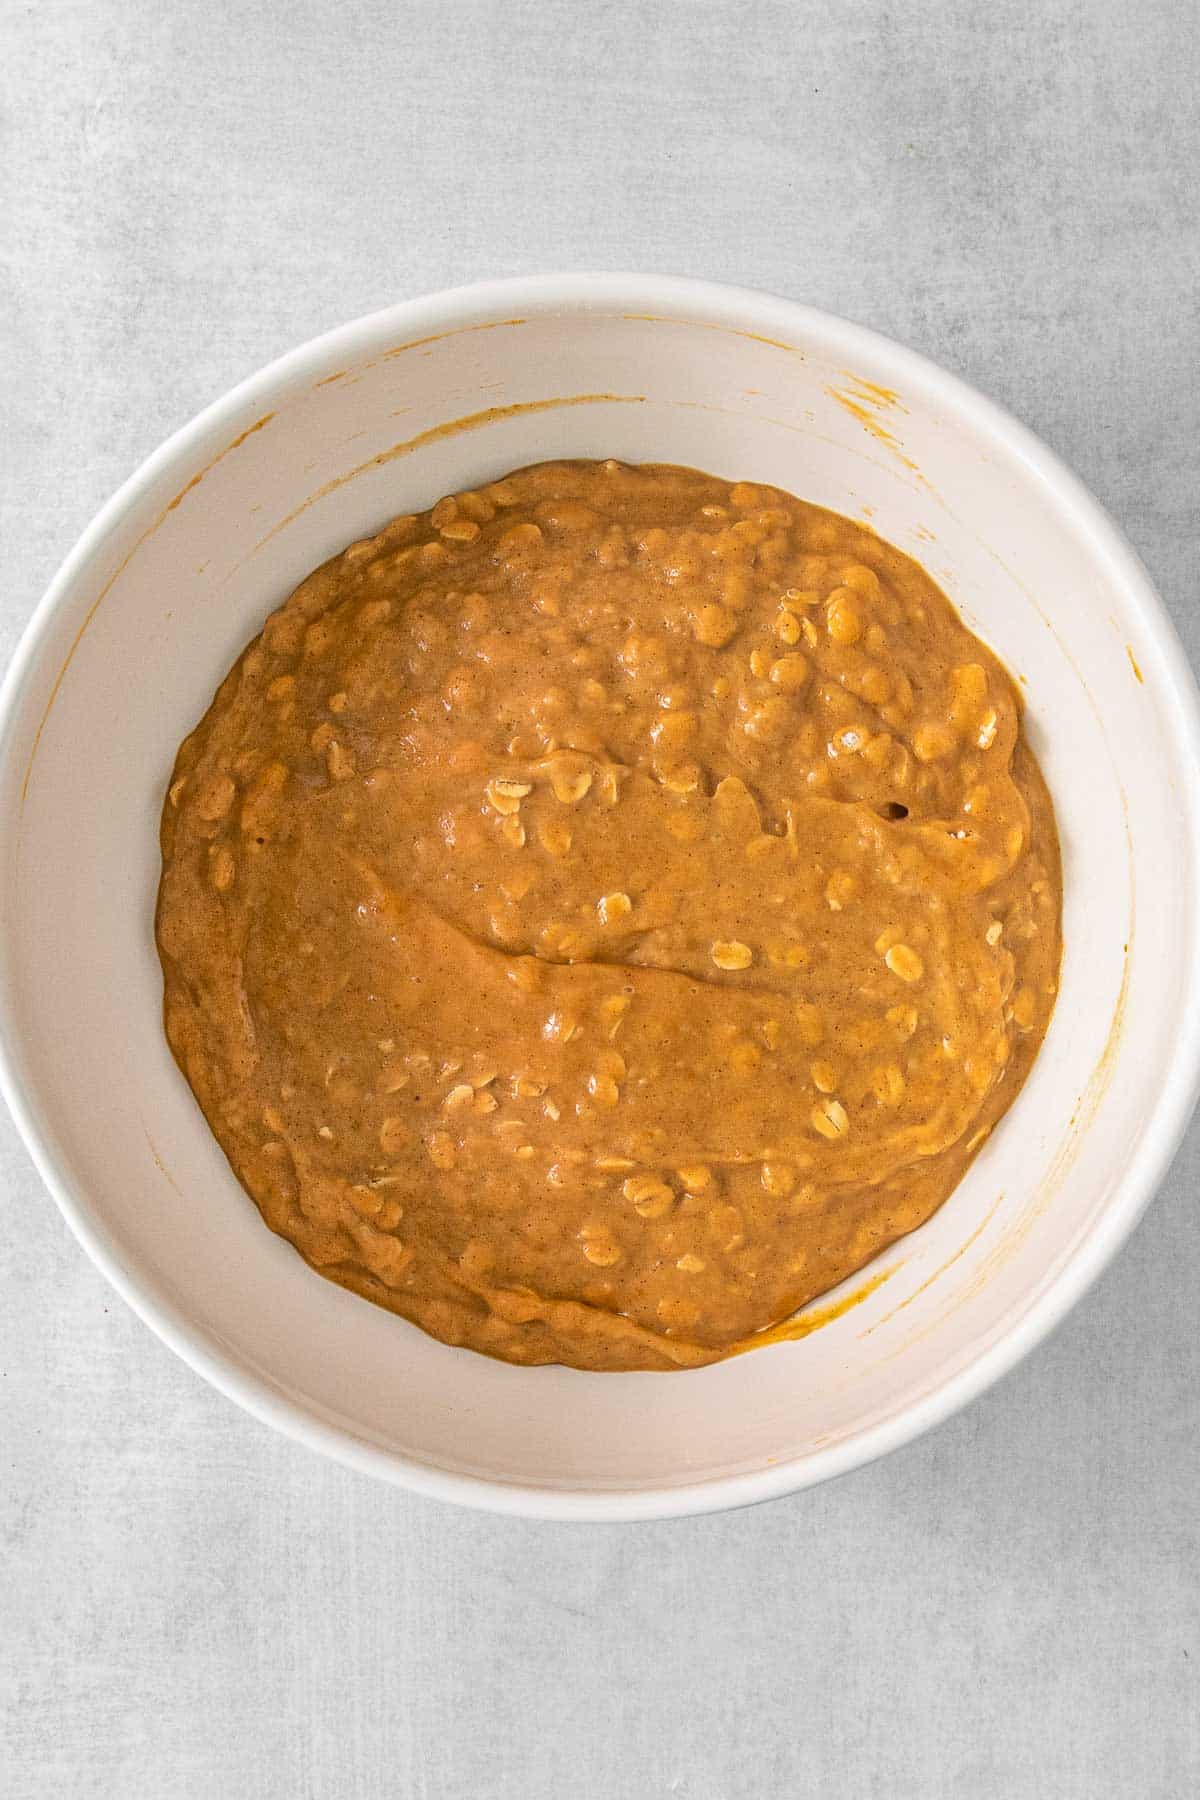 A white bowl filled with a pumpkin oat batter.